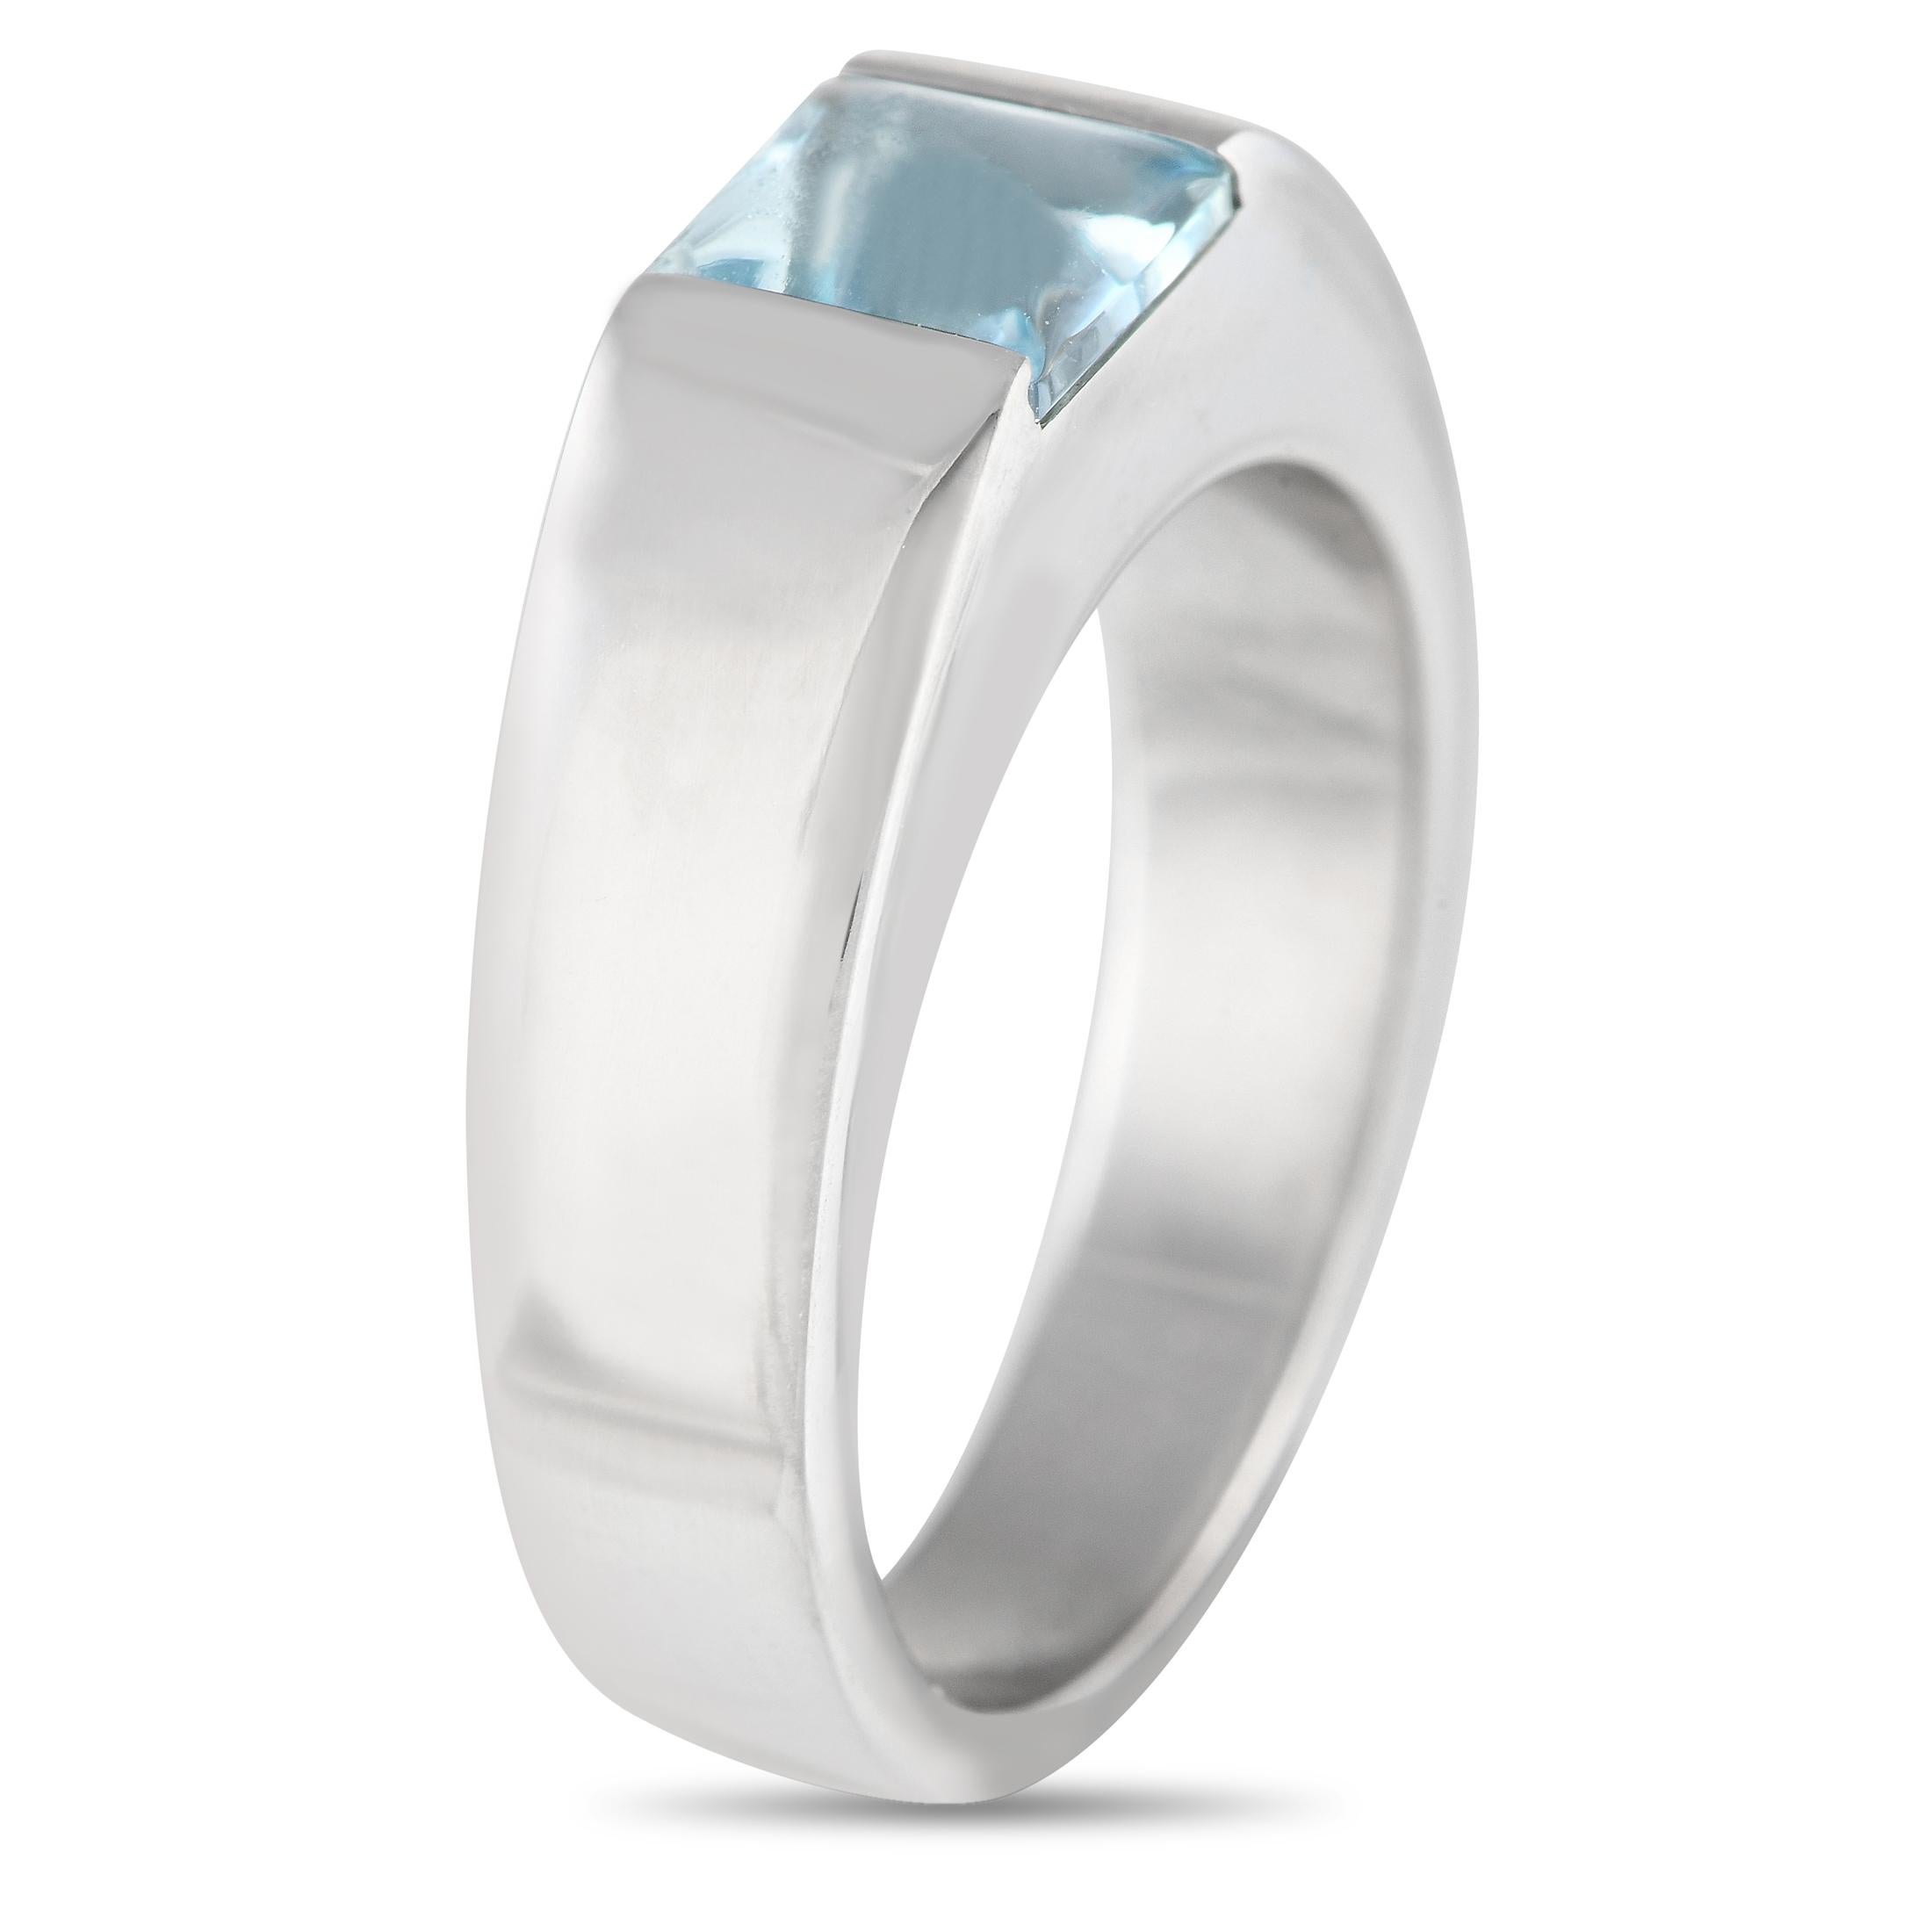 A modern 18K White Gold setting provides the perfect foundation on this exquisite Cartier Tank ring. Simple, elegant, and understated, this piece features a stunning Aquamarine gemstone accenting the center of the design. This luxury ring features a